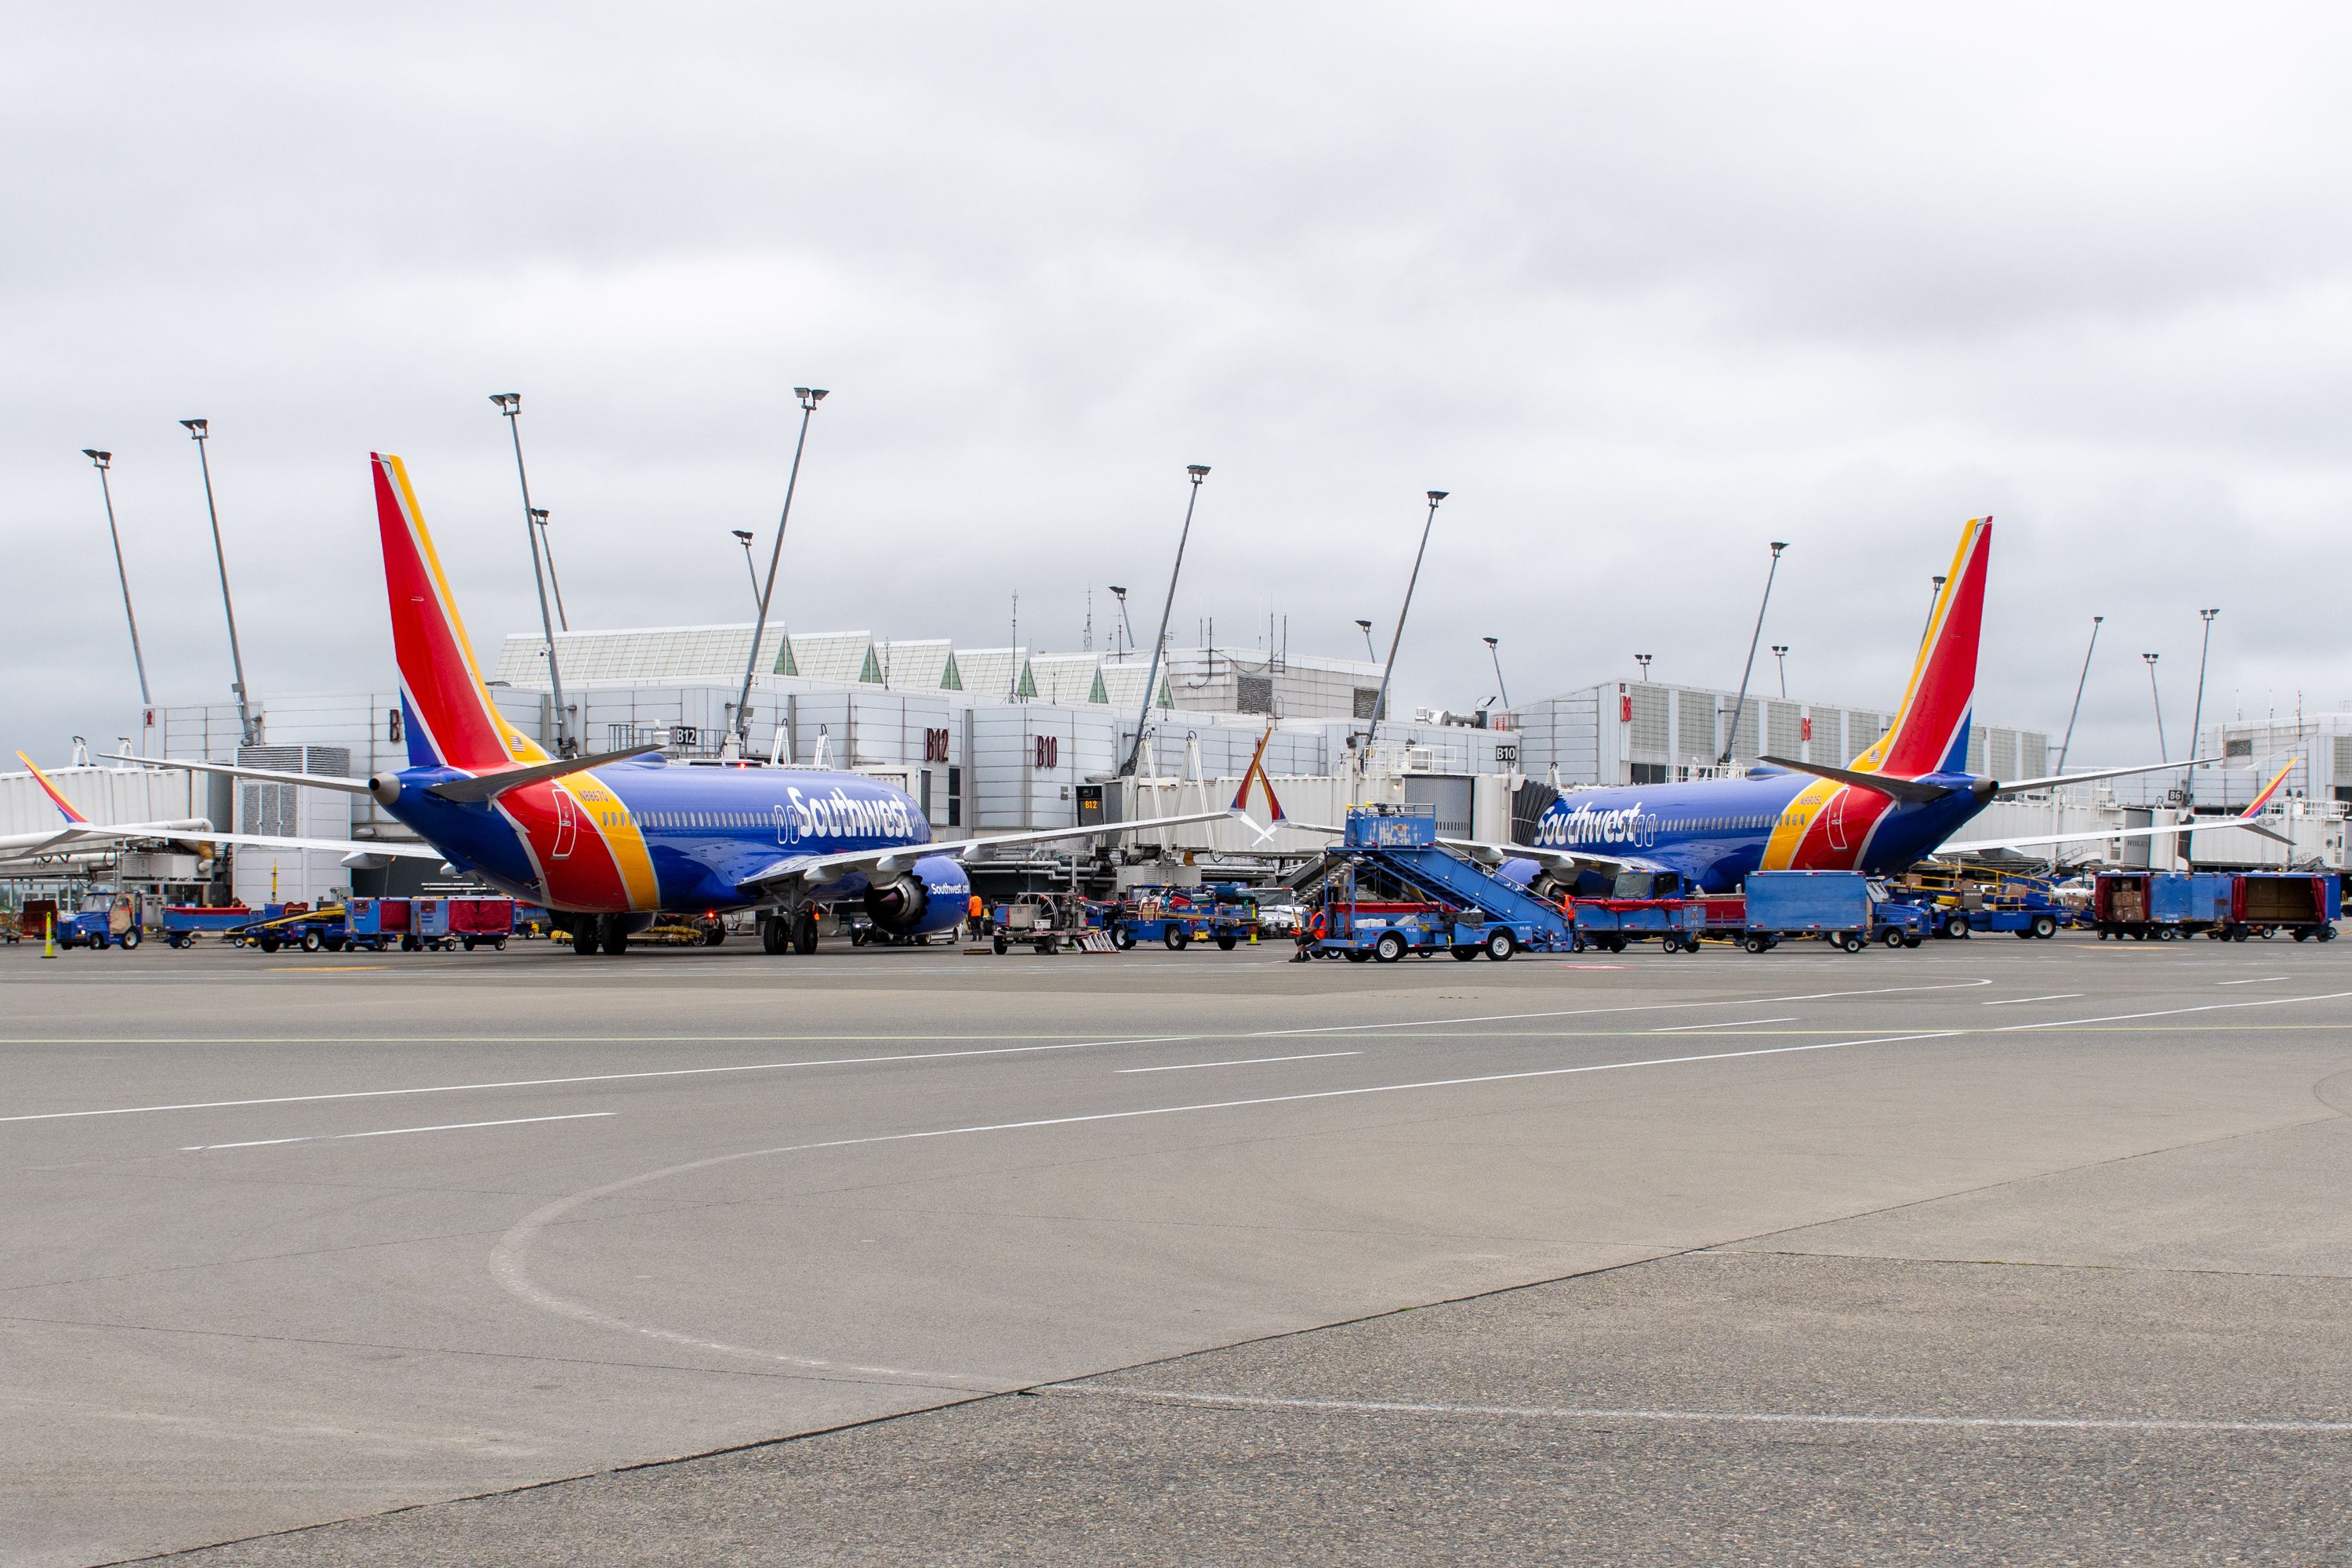 Two Southwest Airlines Boeing 737 MAX 8 aircraft parked at Seattle-Tacoma International Airport.